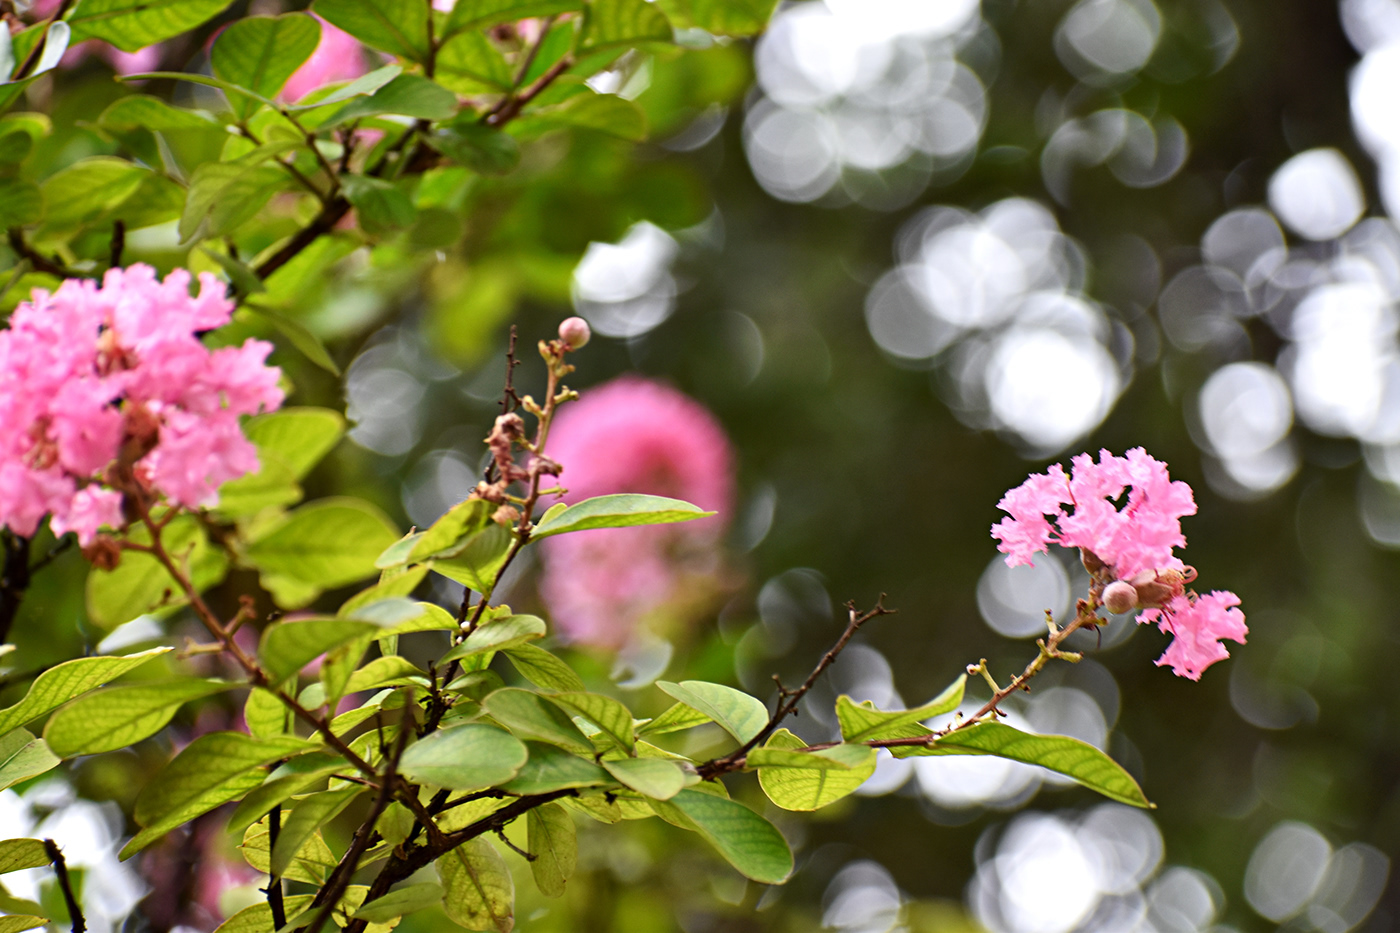 A tree growing with pink flowers blooming on the branches.